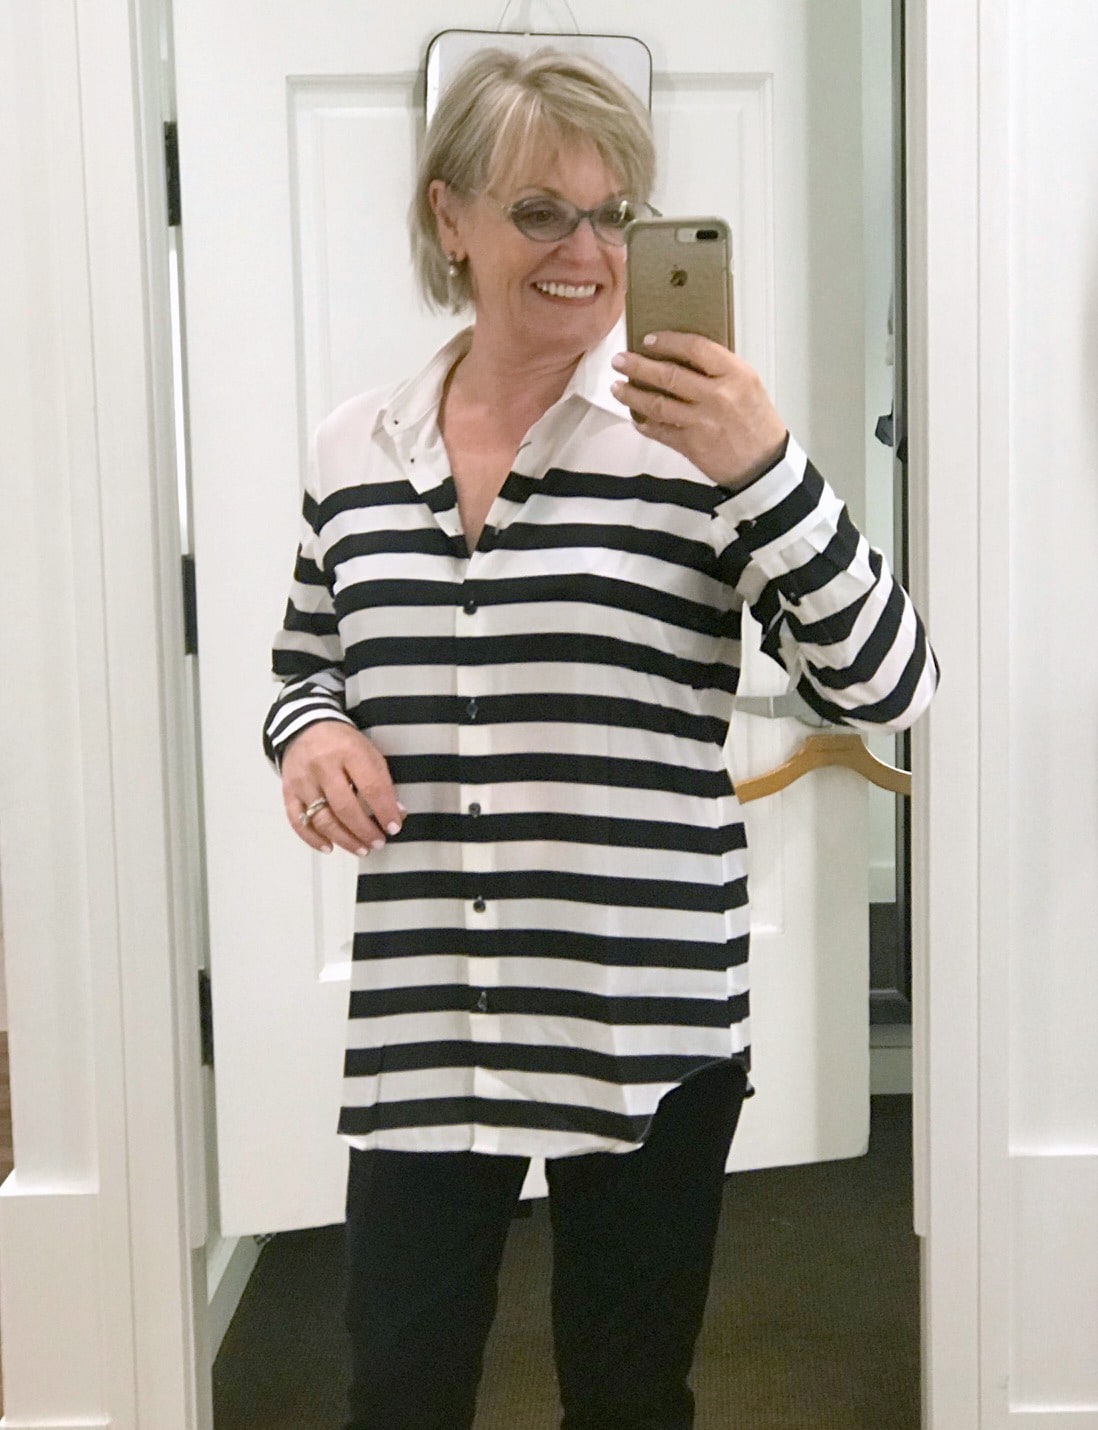 Jennifer Connolly of A Well Styled Life modeling Banana republic Dillon Striped shirt